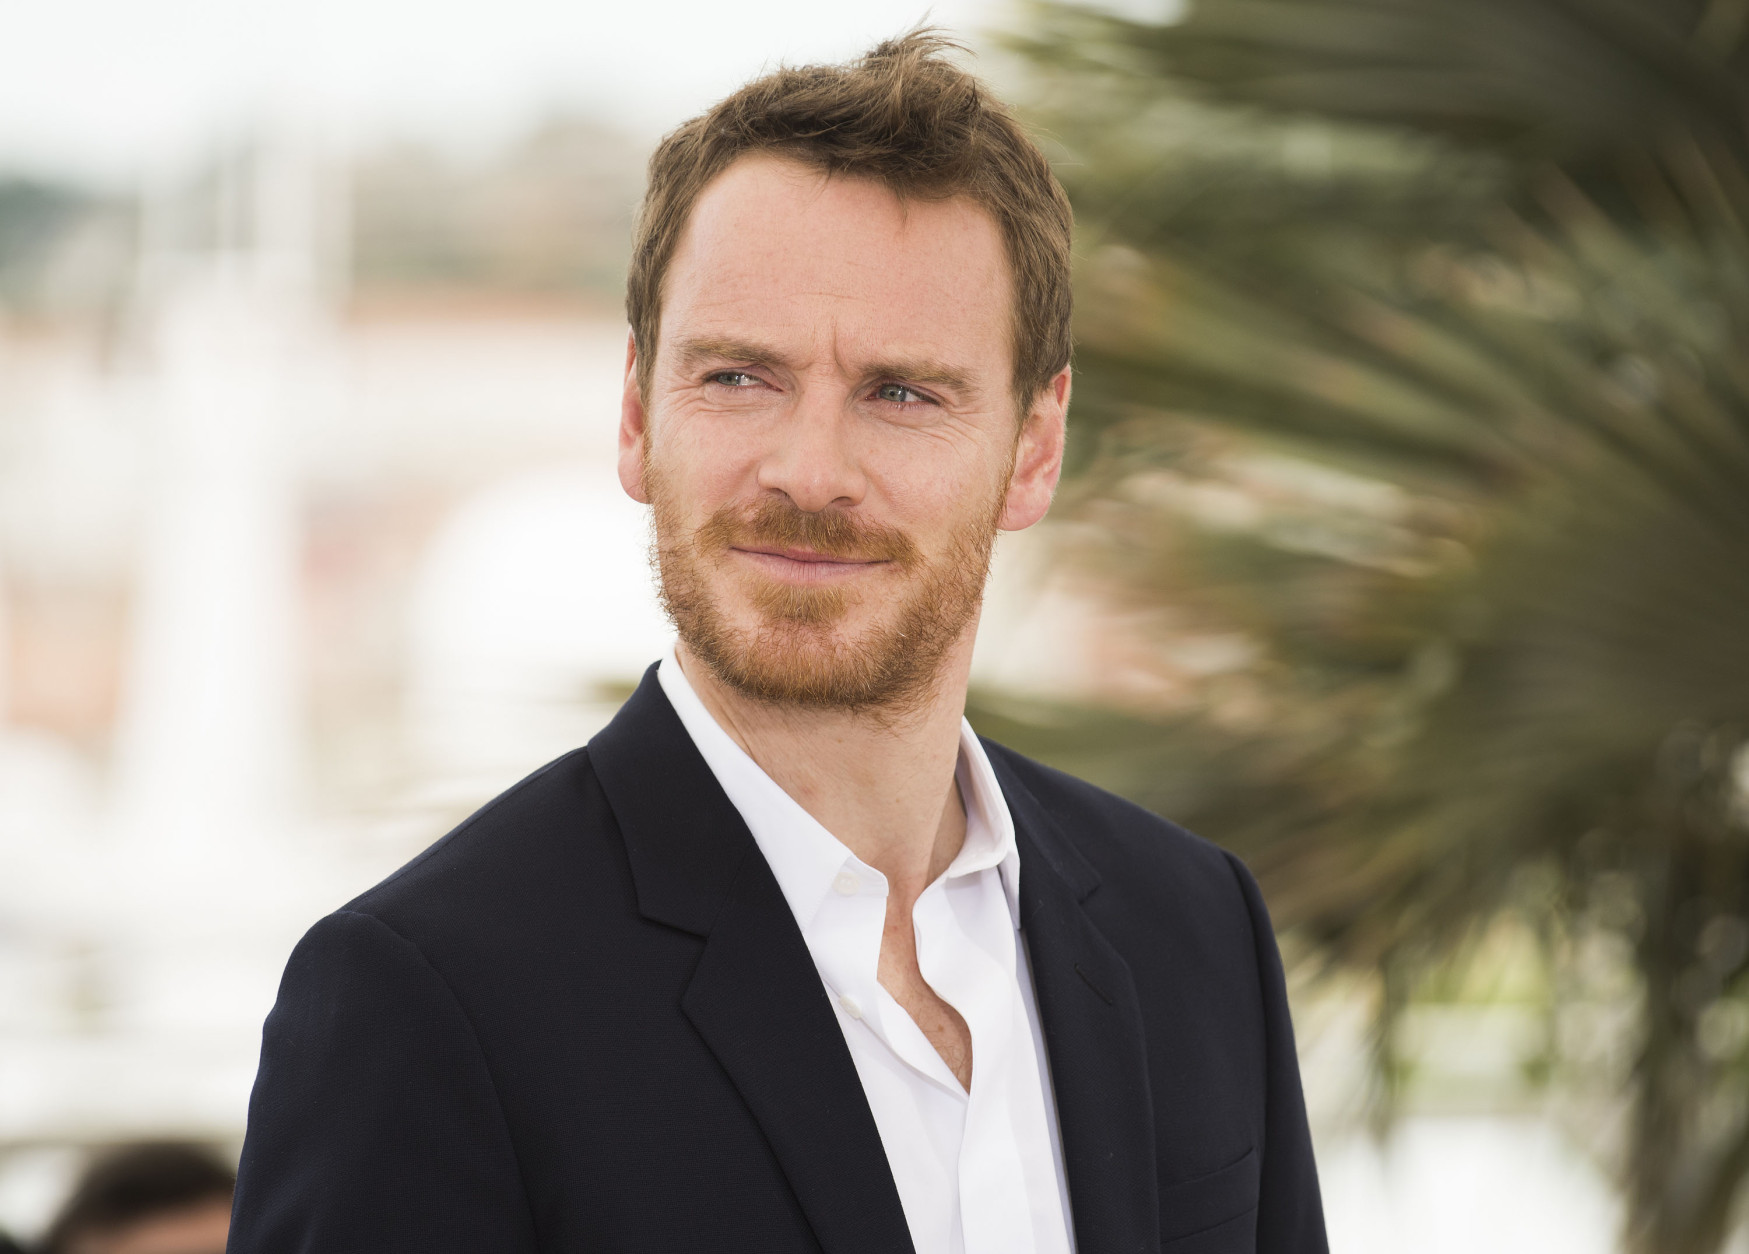 Actor Michael Fassbender poses for photographers during a photo call for the film Macbeth, at the 68th international film festival, Cannes, southern France, Saturday, May 23, 2015. (Photo by Arthur Mola/Invision/AP)